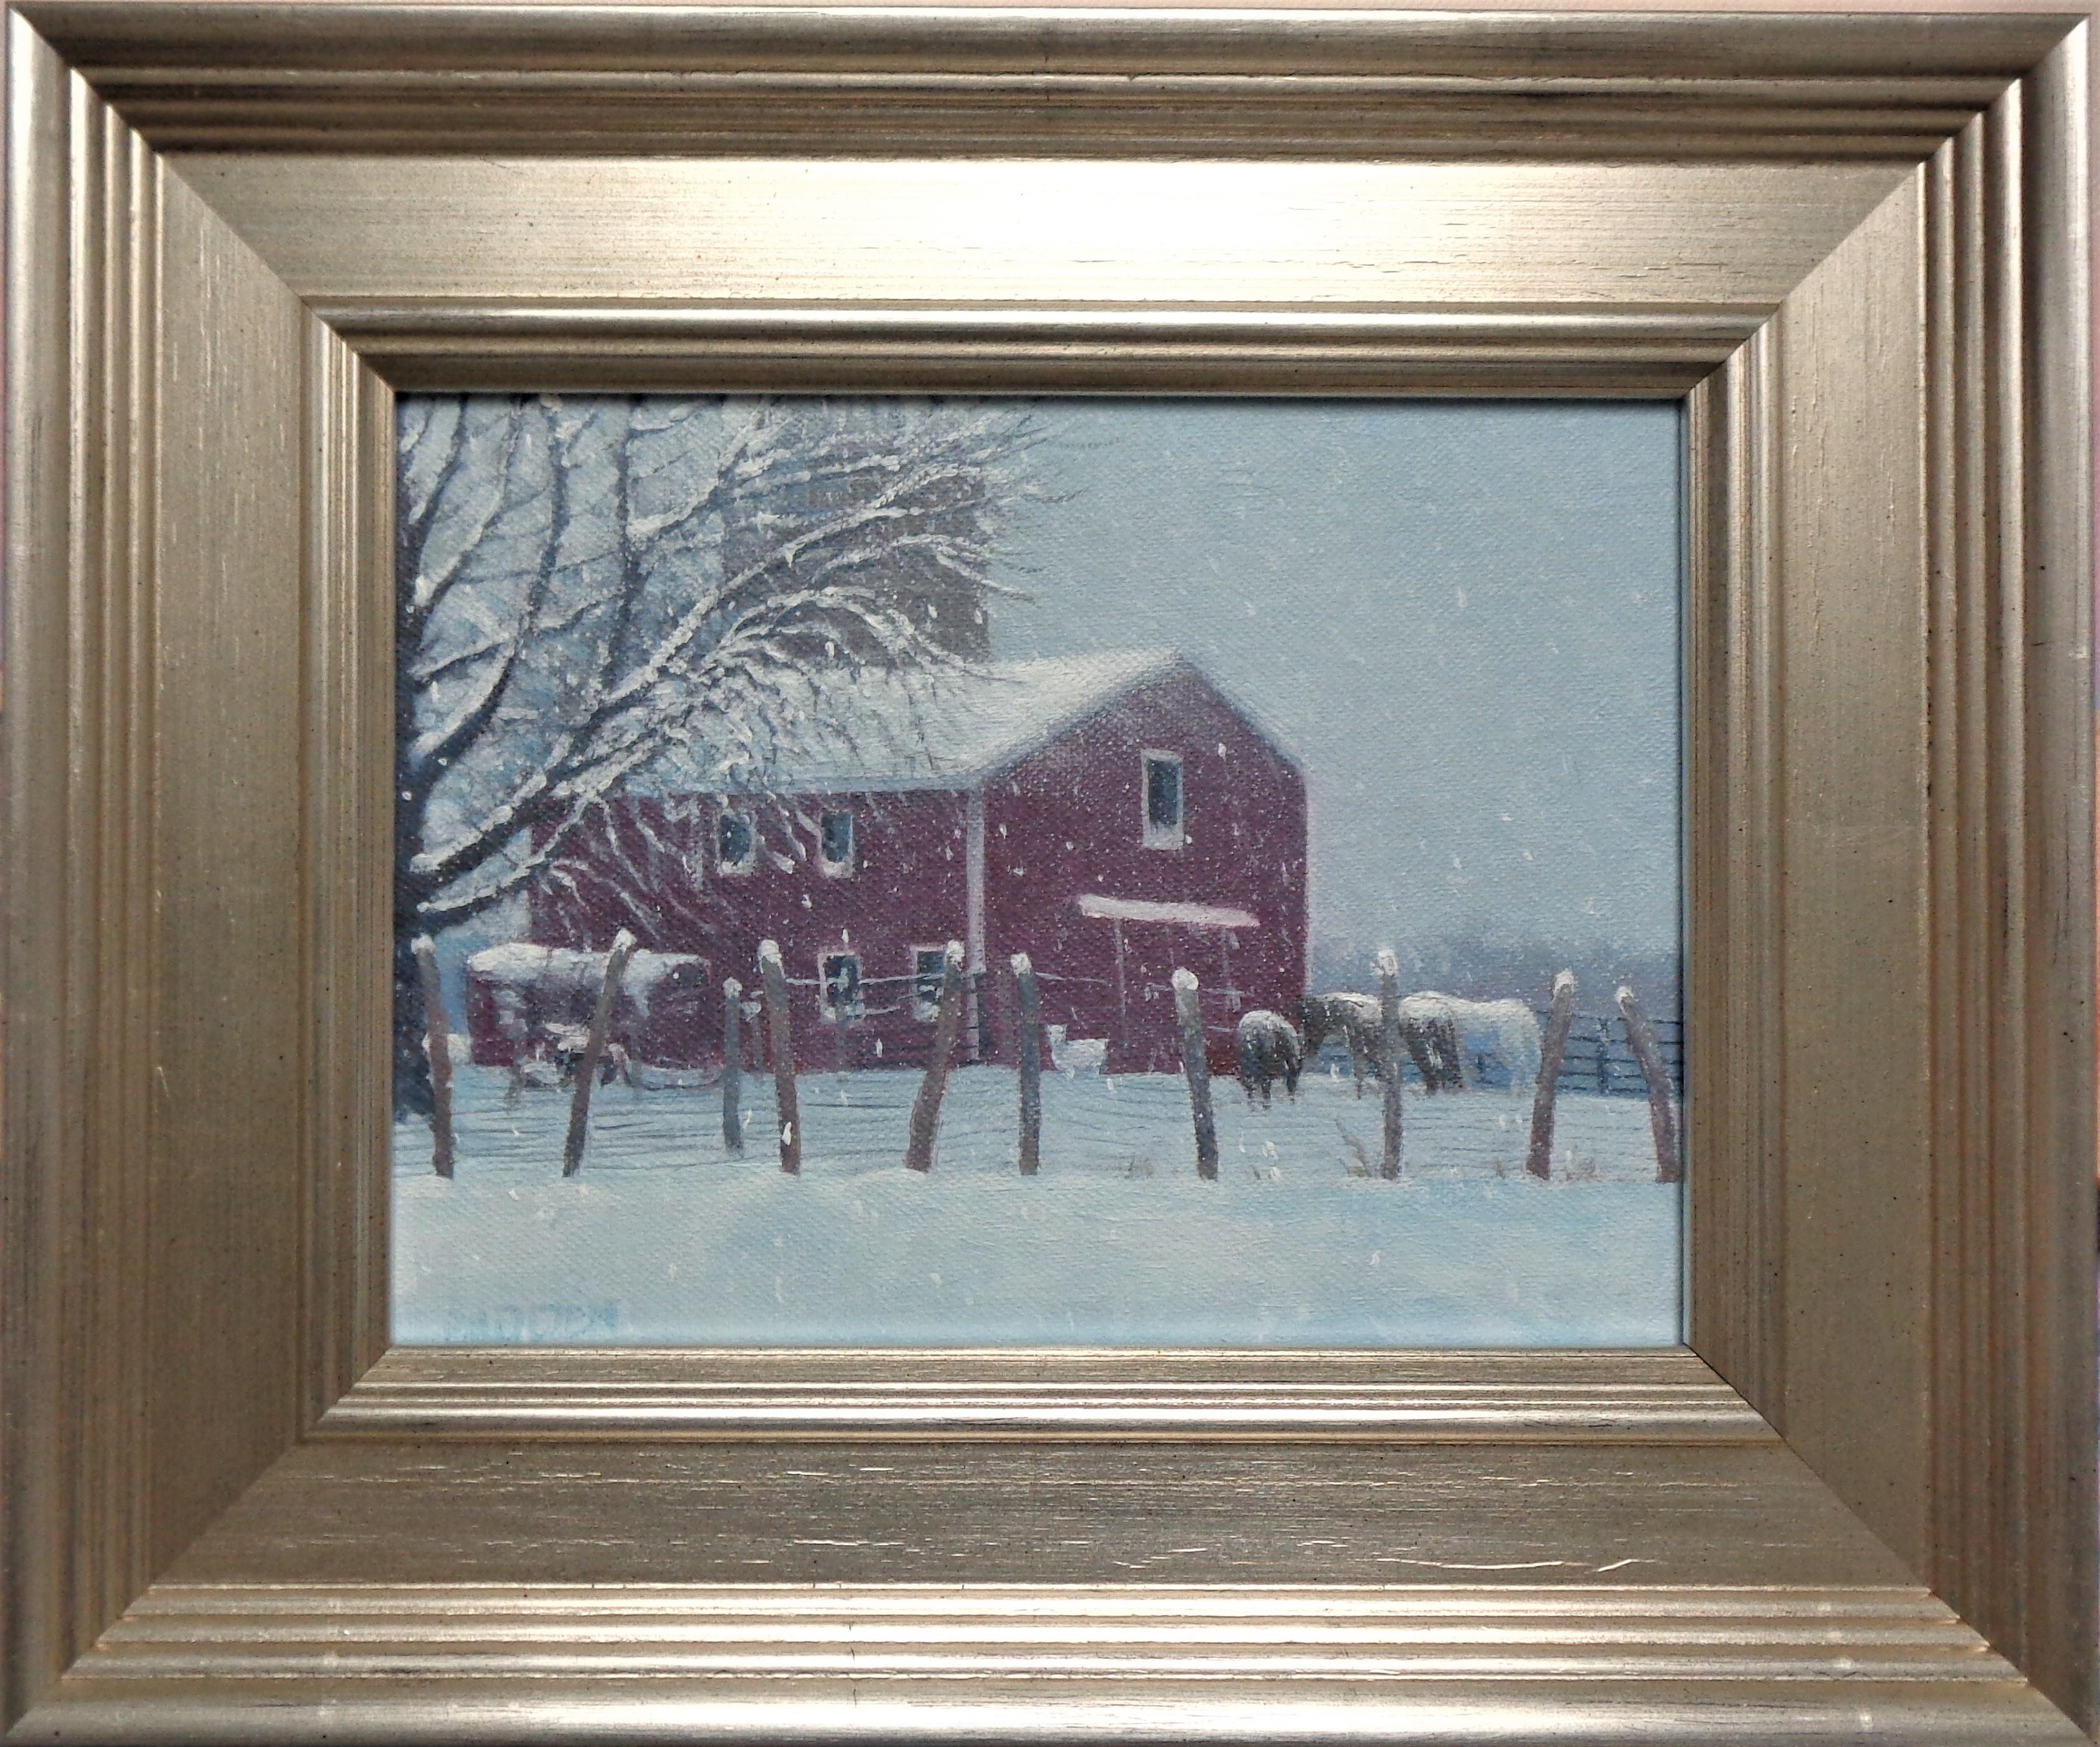 Winter Farm II
oil/canvas panel
6 x 8 image
I enjoy playing with light in my paintings and creating a mood while trying to push the range of color using subtle transitions like in the snow here in this winter scene. 
The frame has an aged antique